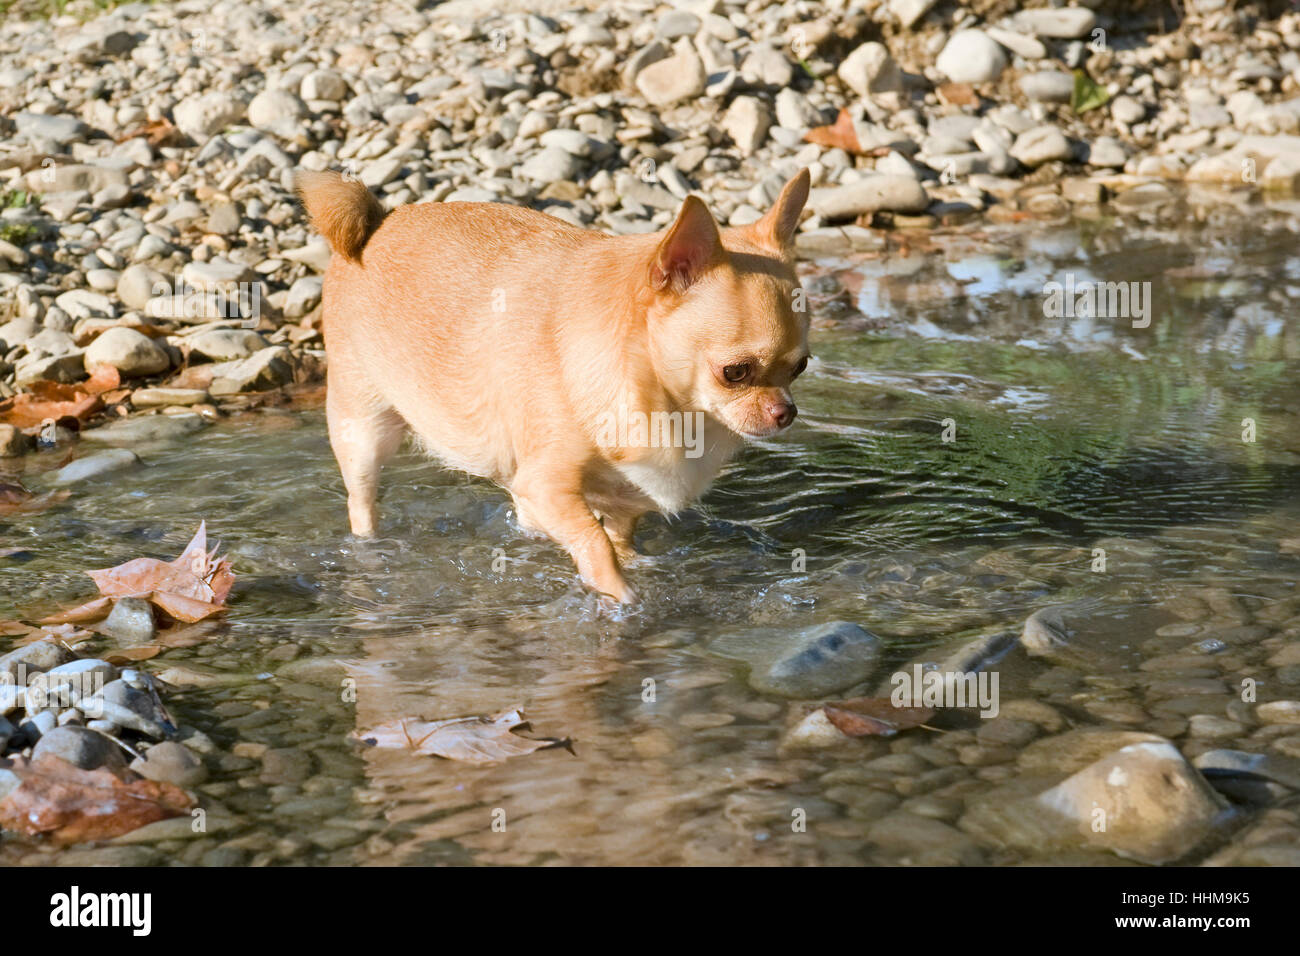 dog, thick, wide, fat, obesity, river, water, walk, go, going, walking, Stock Photo